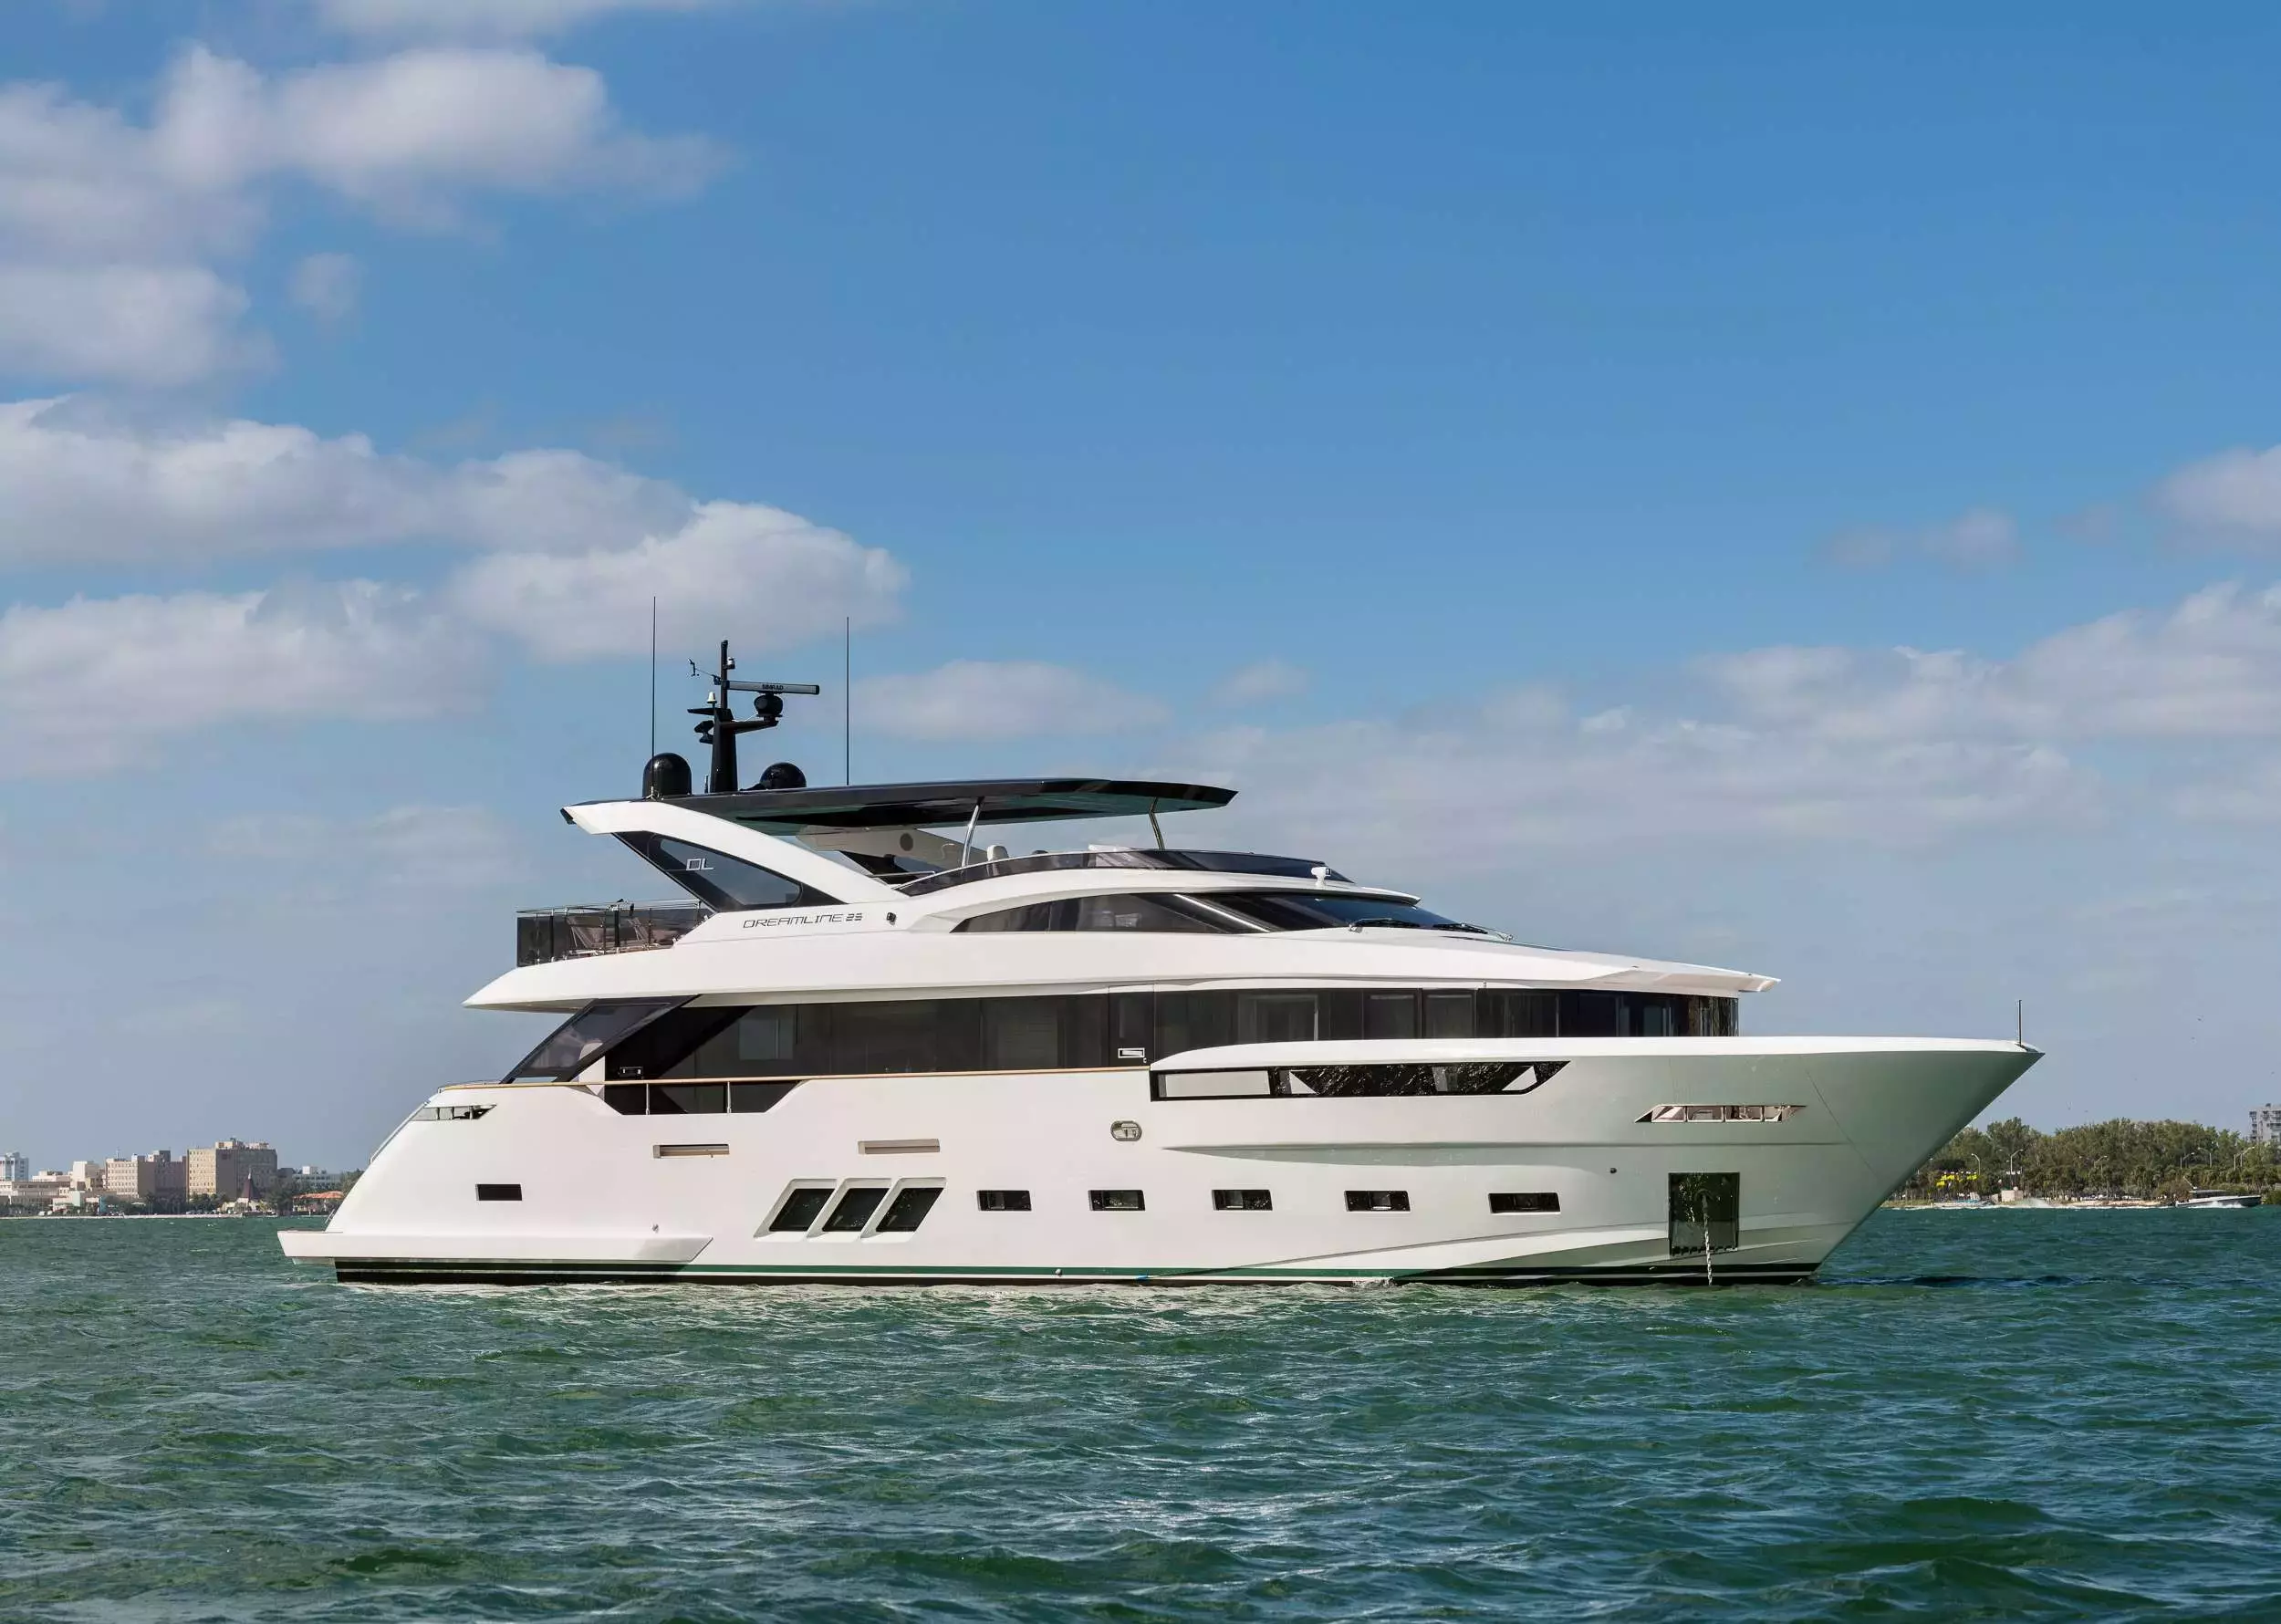 The Peddler by DL Yachts - Top rates for a Charter of a private Motor Yacht in Barbados